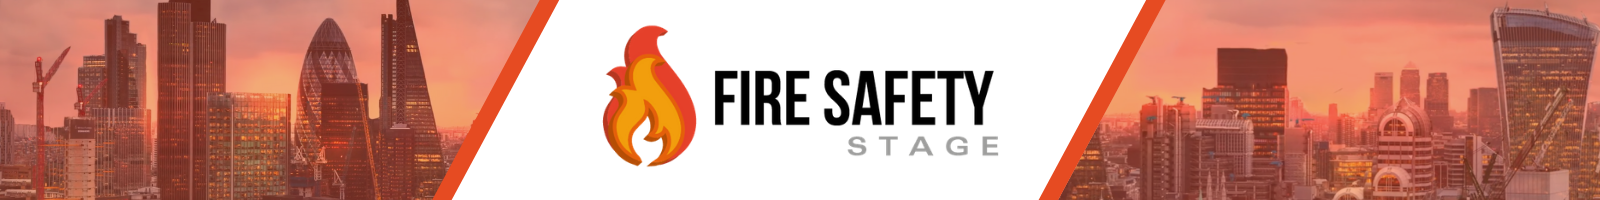 FIRE SAFETY STAGE